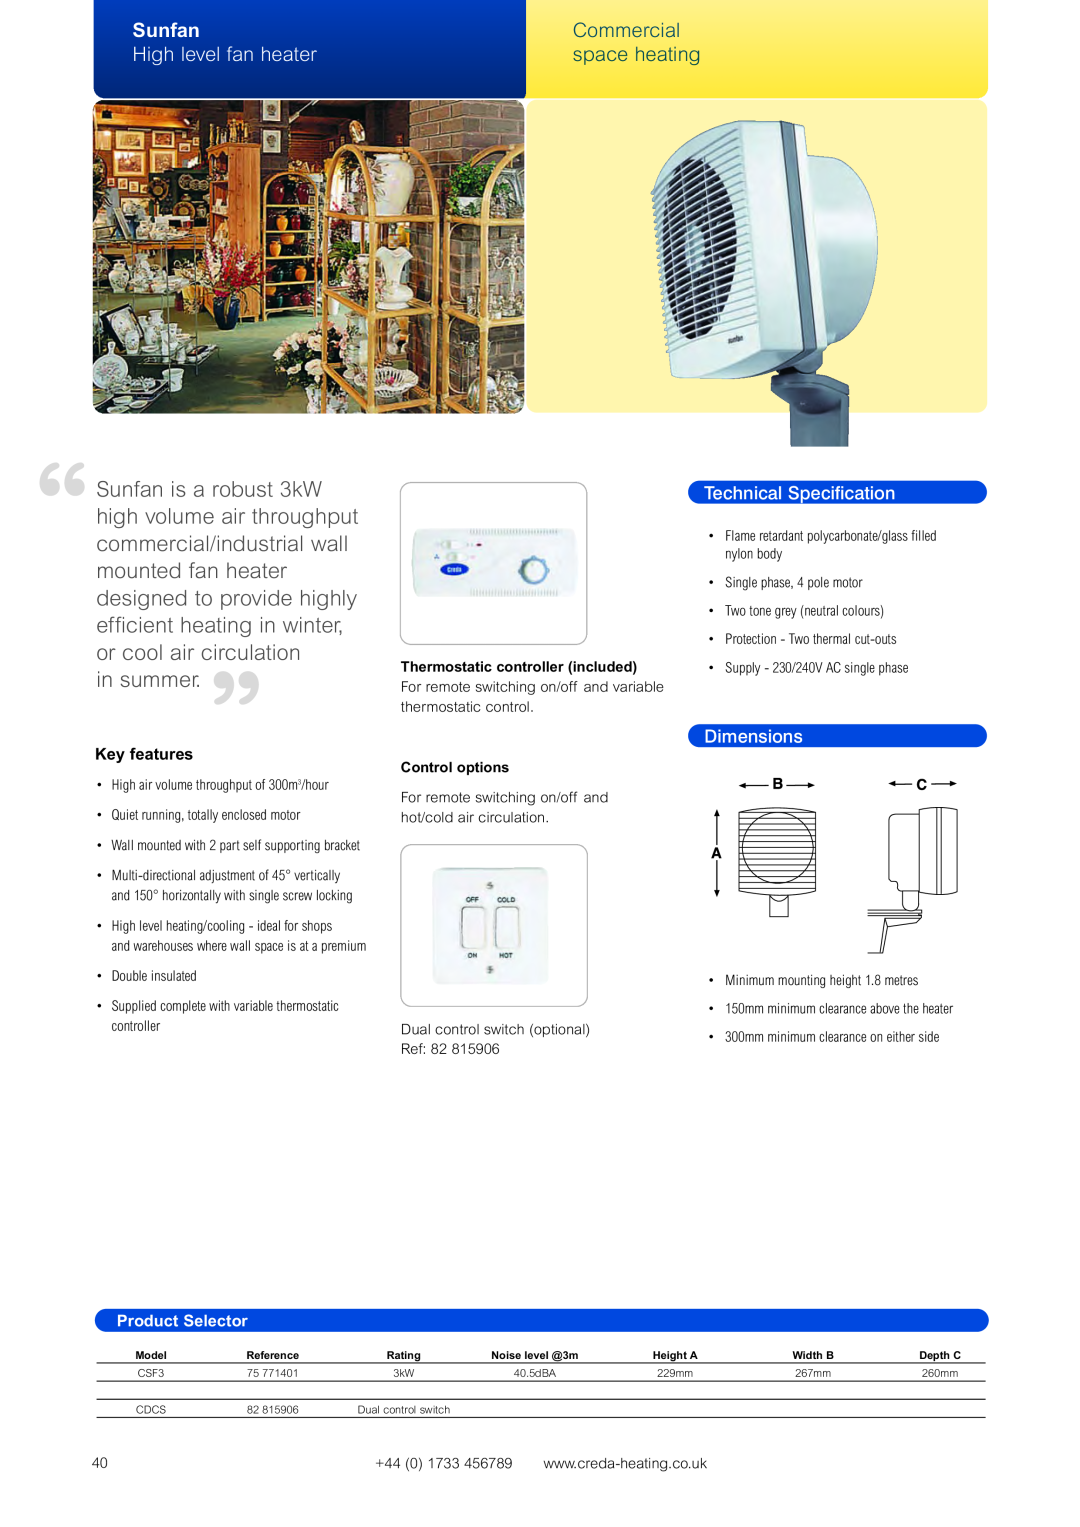 Creda Heating Solution in summer. ”, Sunfan, High level fan heater, Commercial space heating, Technical Specification 